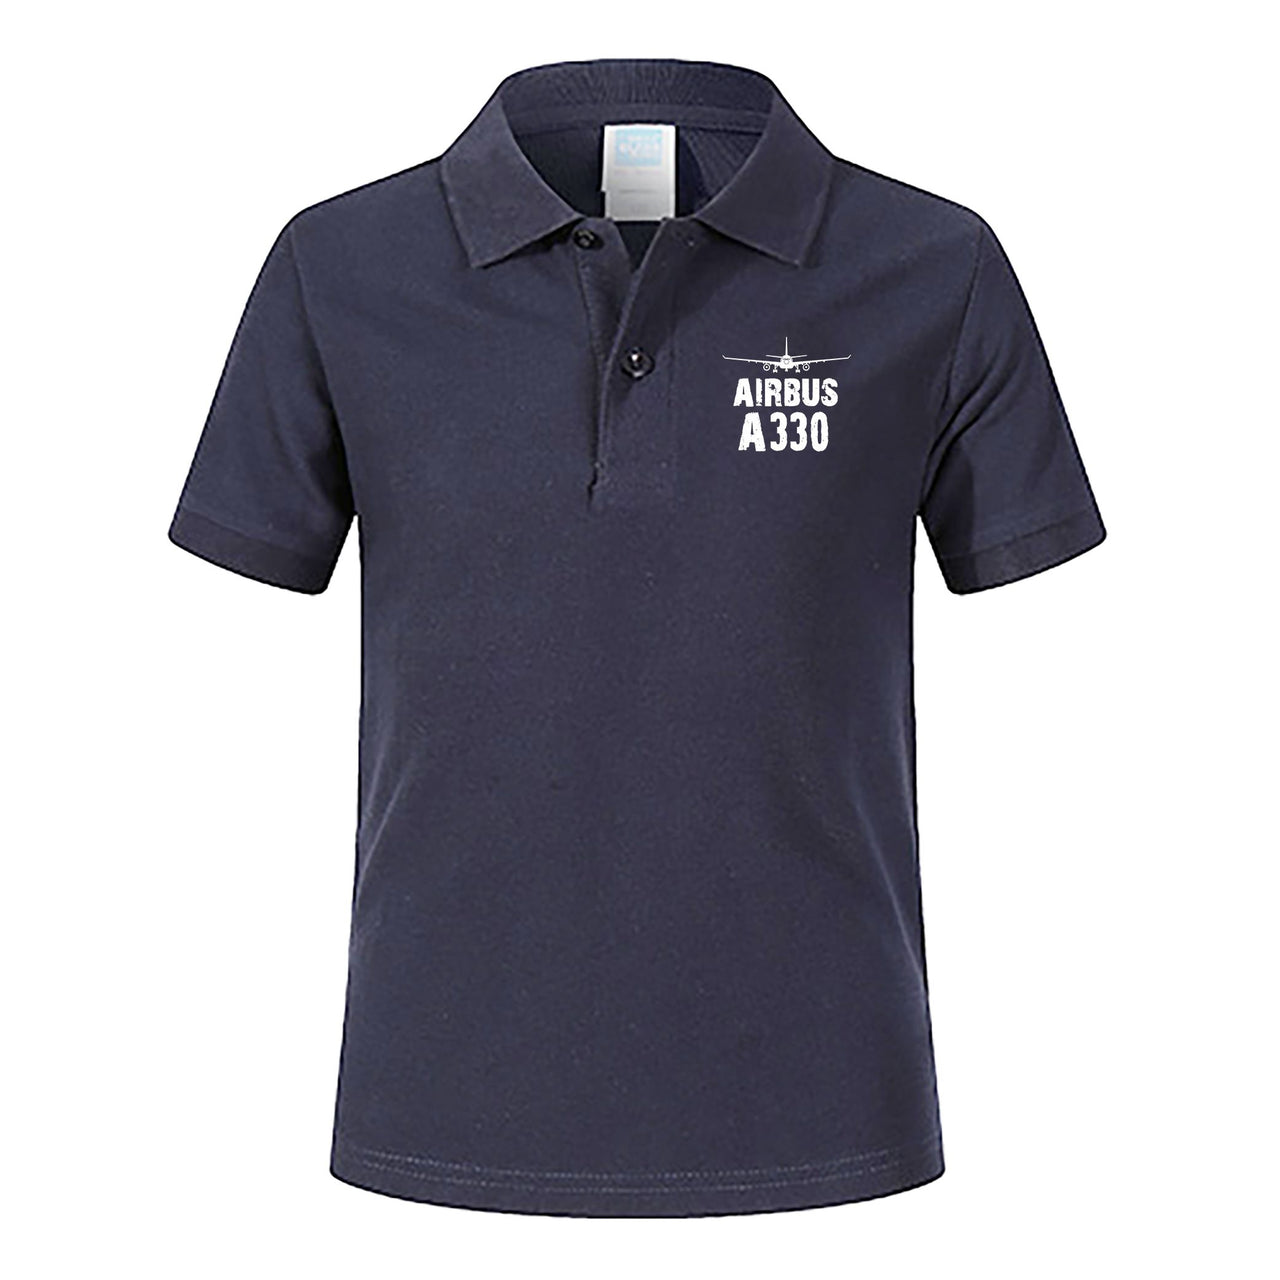 Airbus A330 & Plane Designed Children Polo T-Shirts